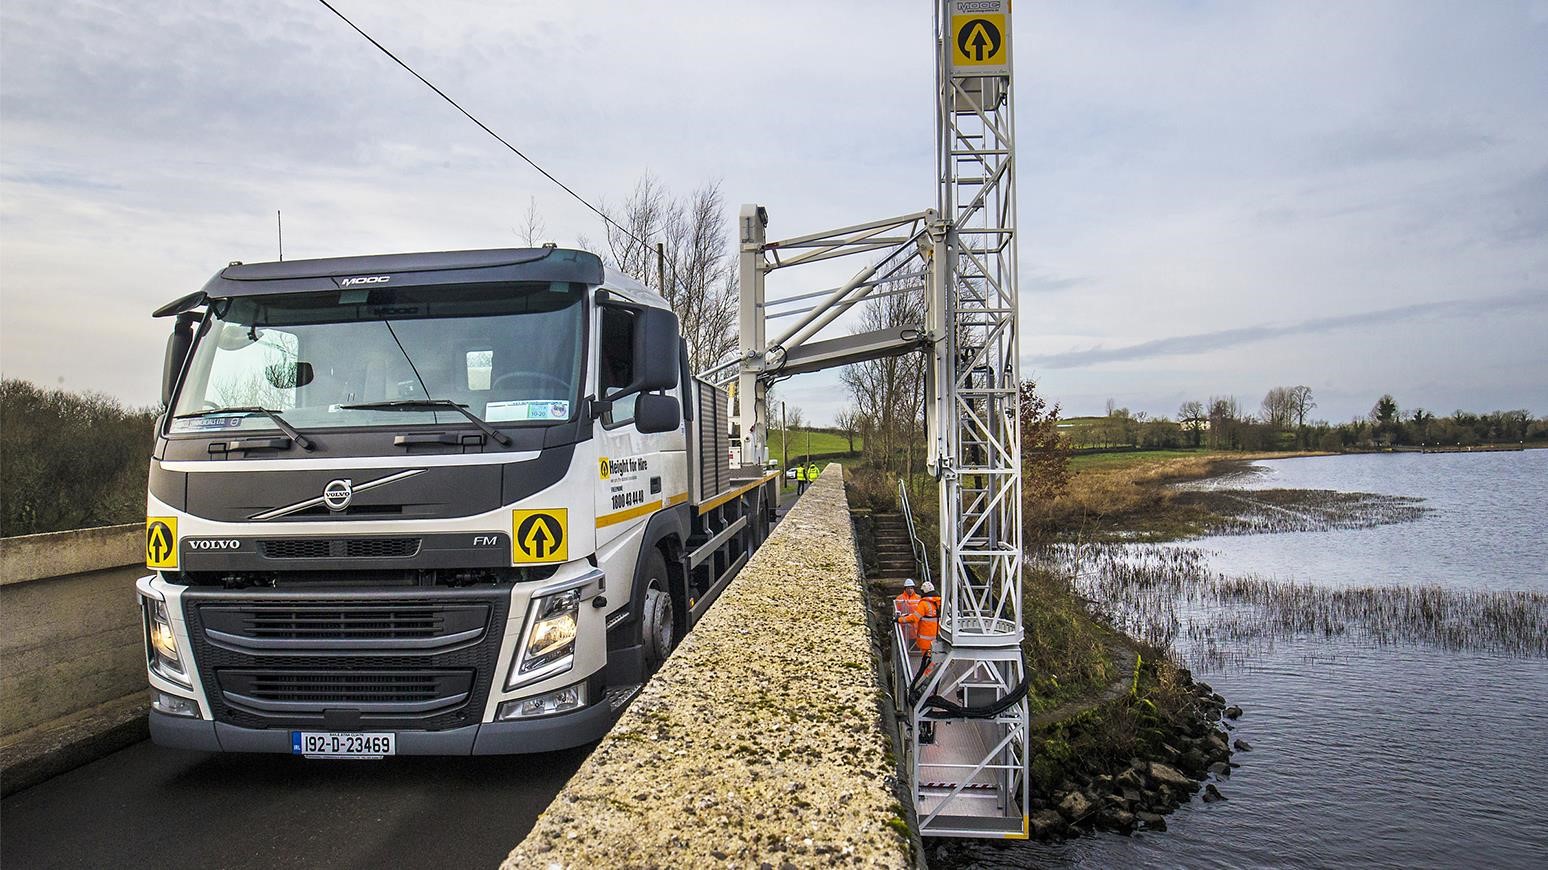 Height For Hire Chooses Volvo FM 4x2 Rigid Truck To Work With Moog Underbridge Unit